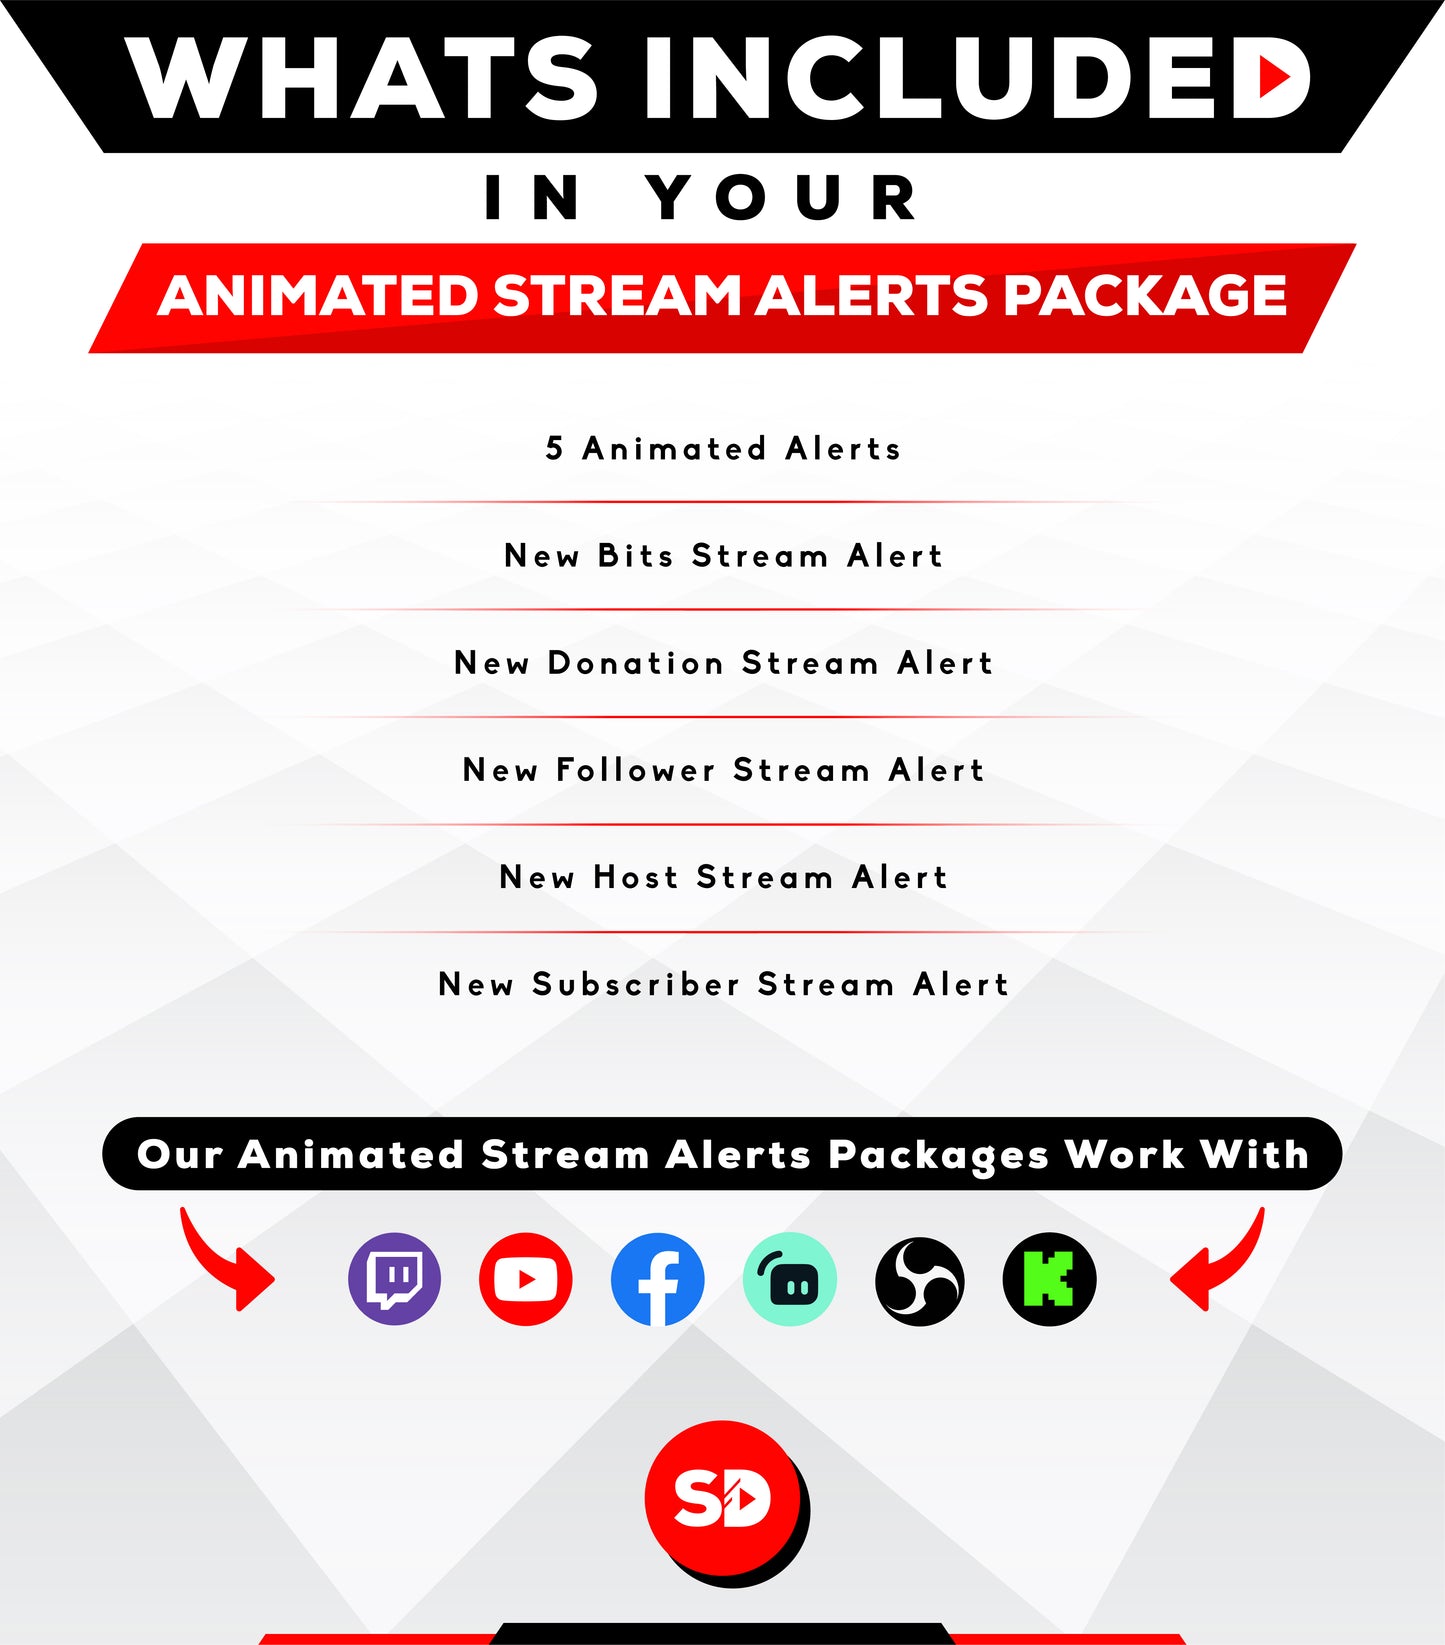 Whats included in your package - Alerts - Shadow